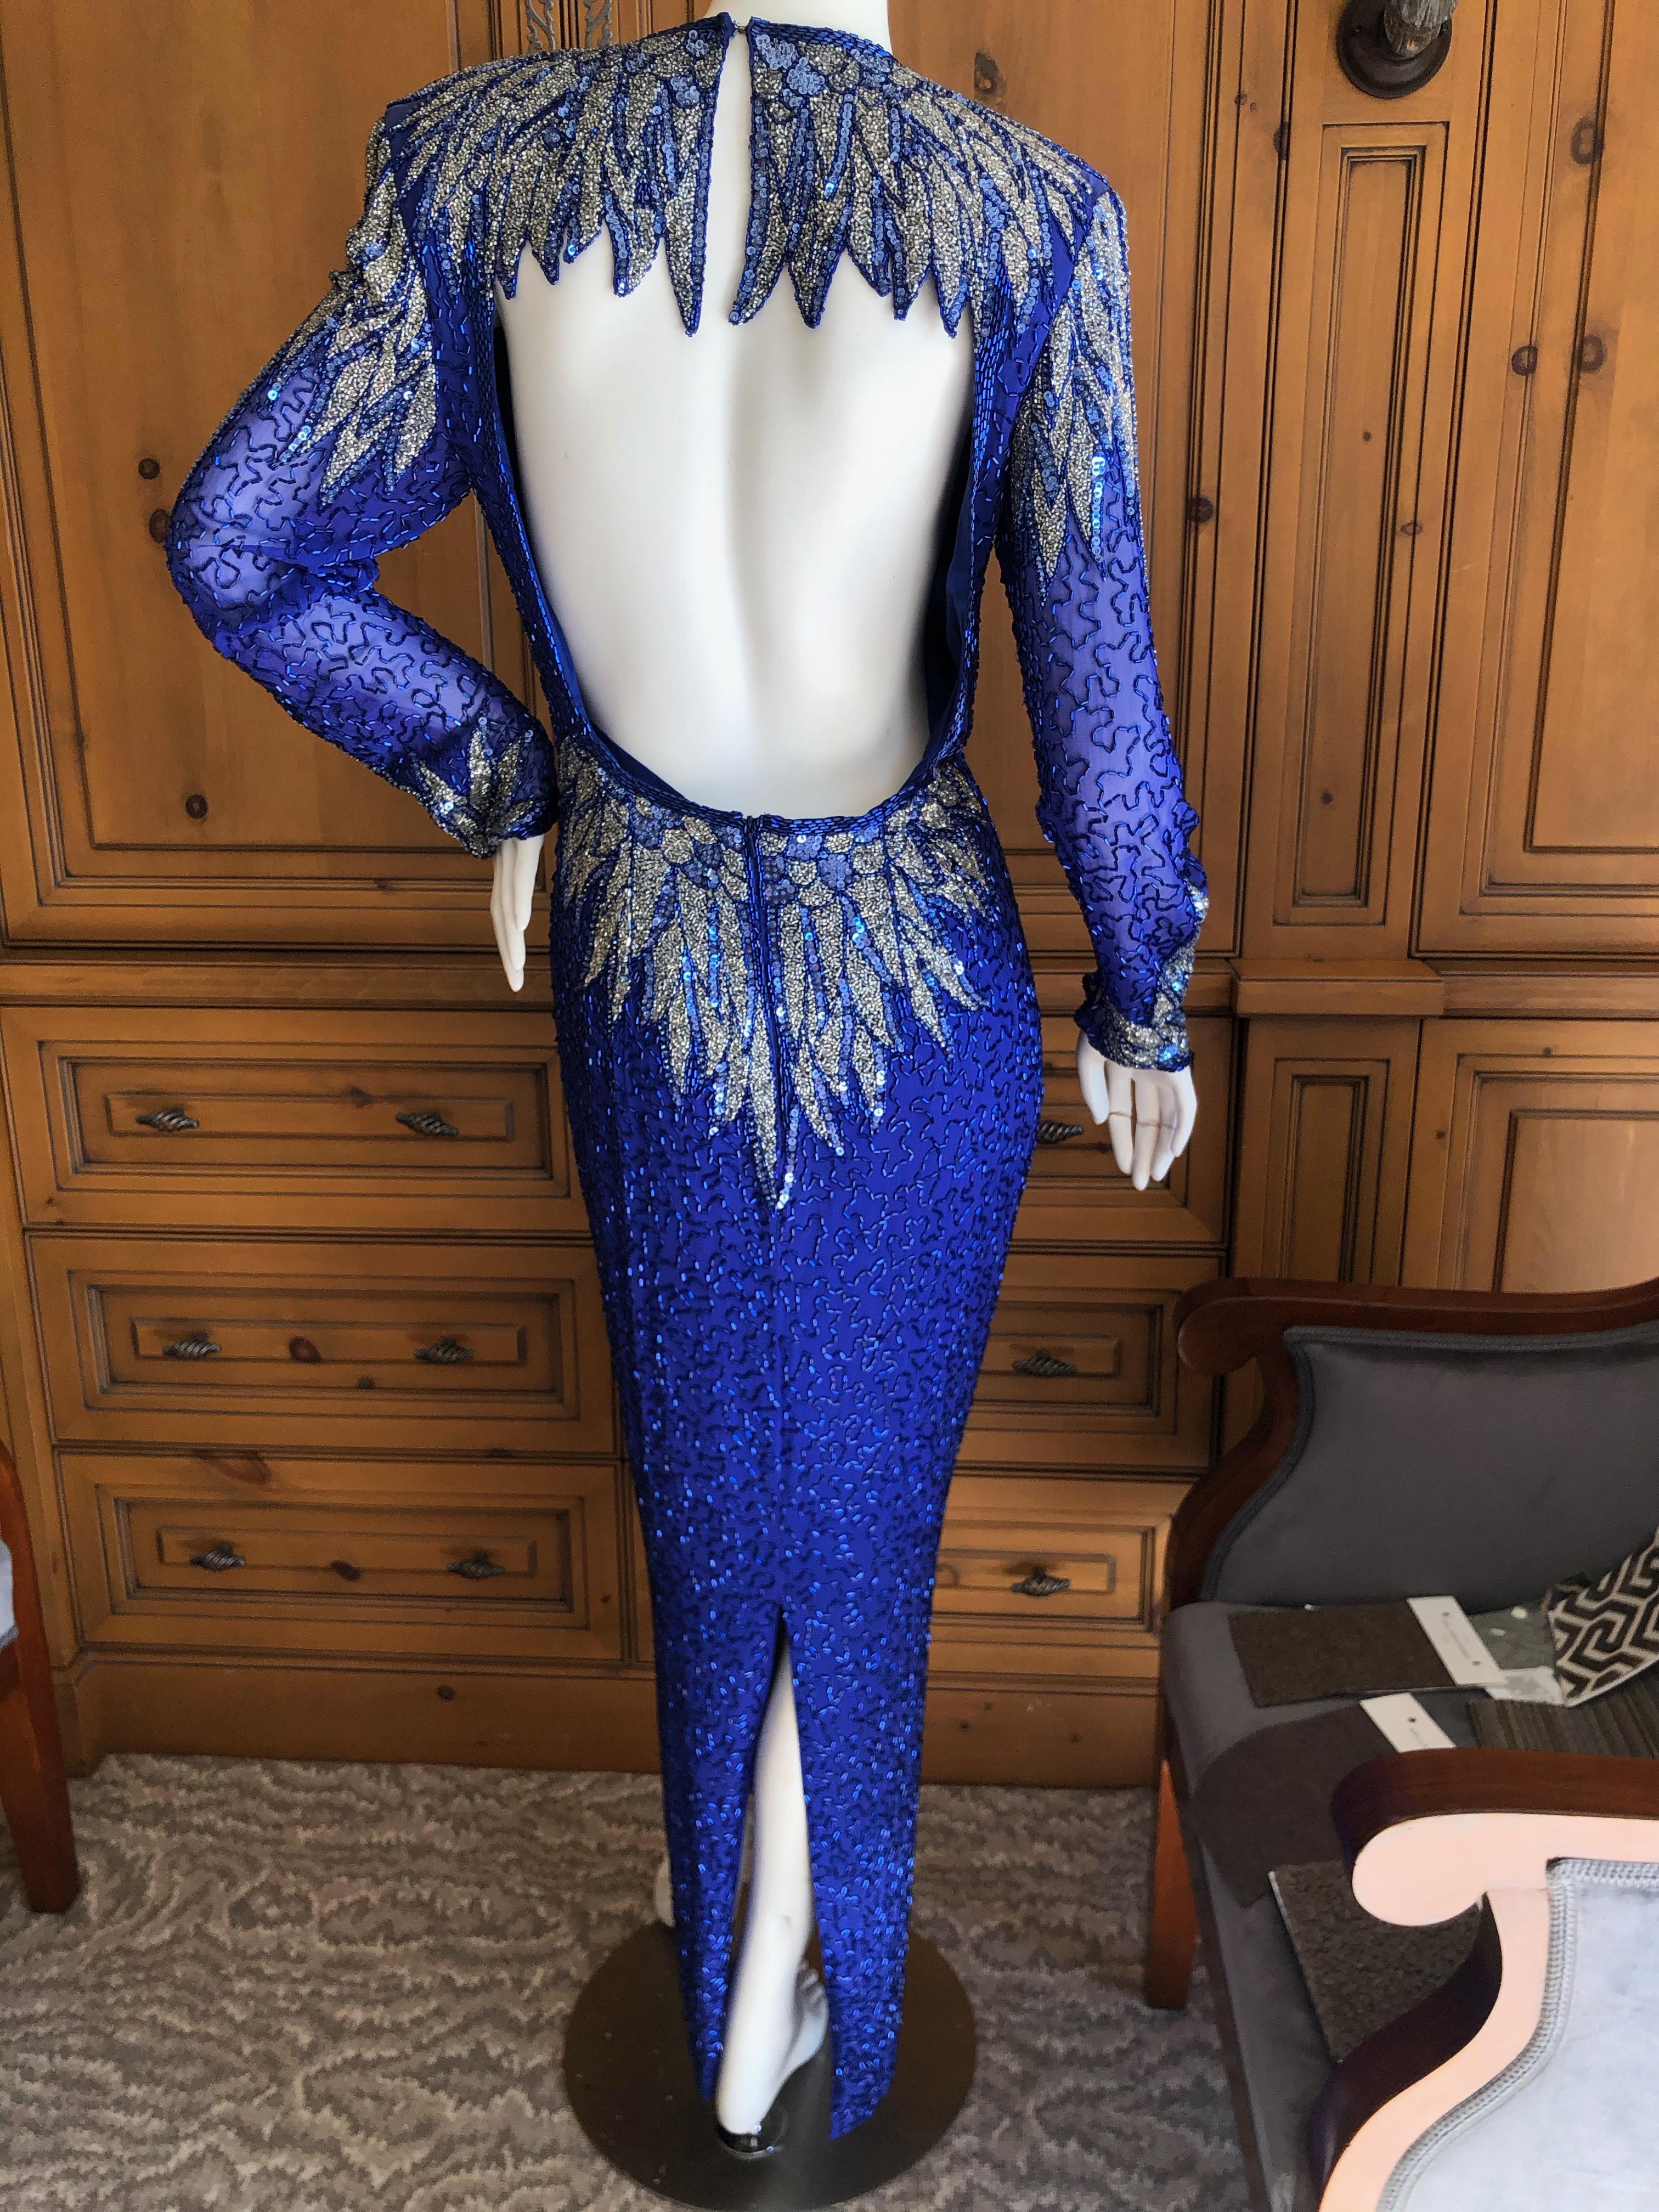 Oleg Cassini Seventies Sequin Beaded Backless Evening Dress.
DIsco era divine, so much prettier in person.
Made in Hong Kong back in the seventies,by He-Ro , this is all glass beading and is  comparable to a Bob Mackie from the same era.
Size 8, but